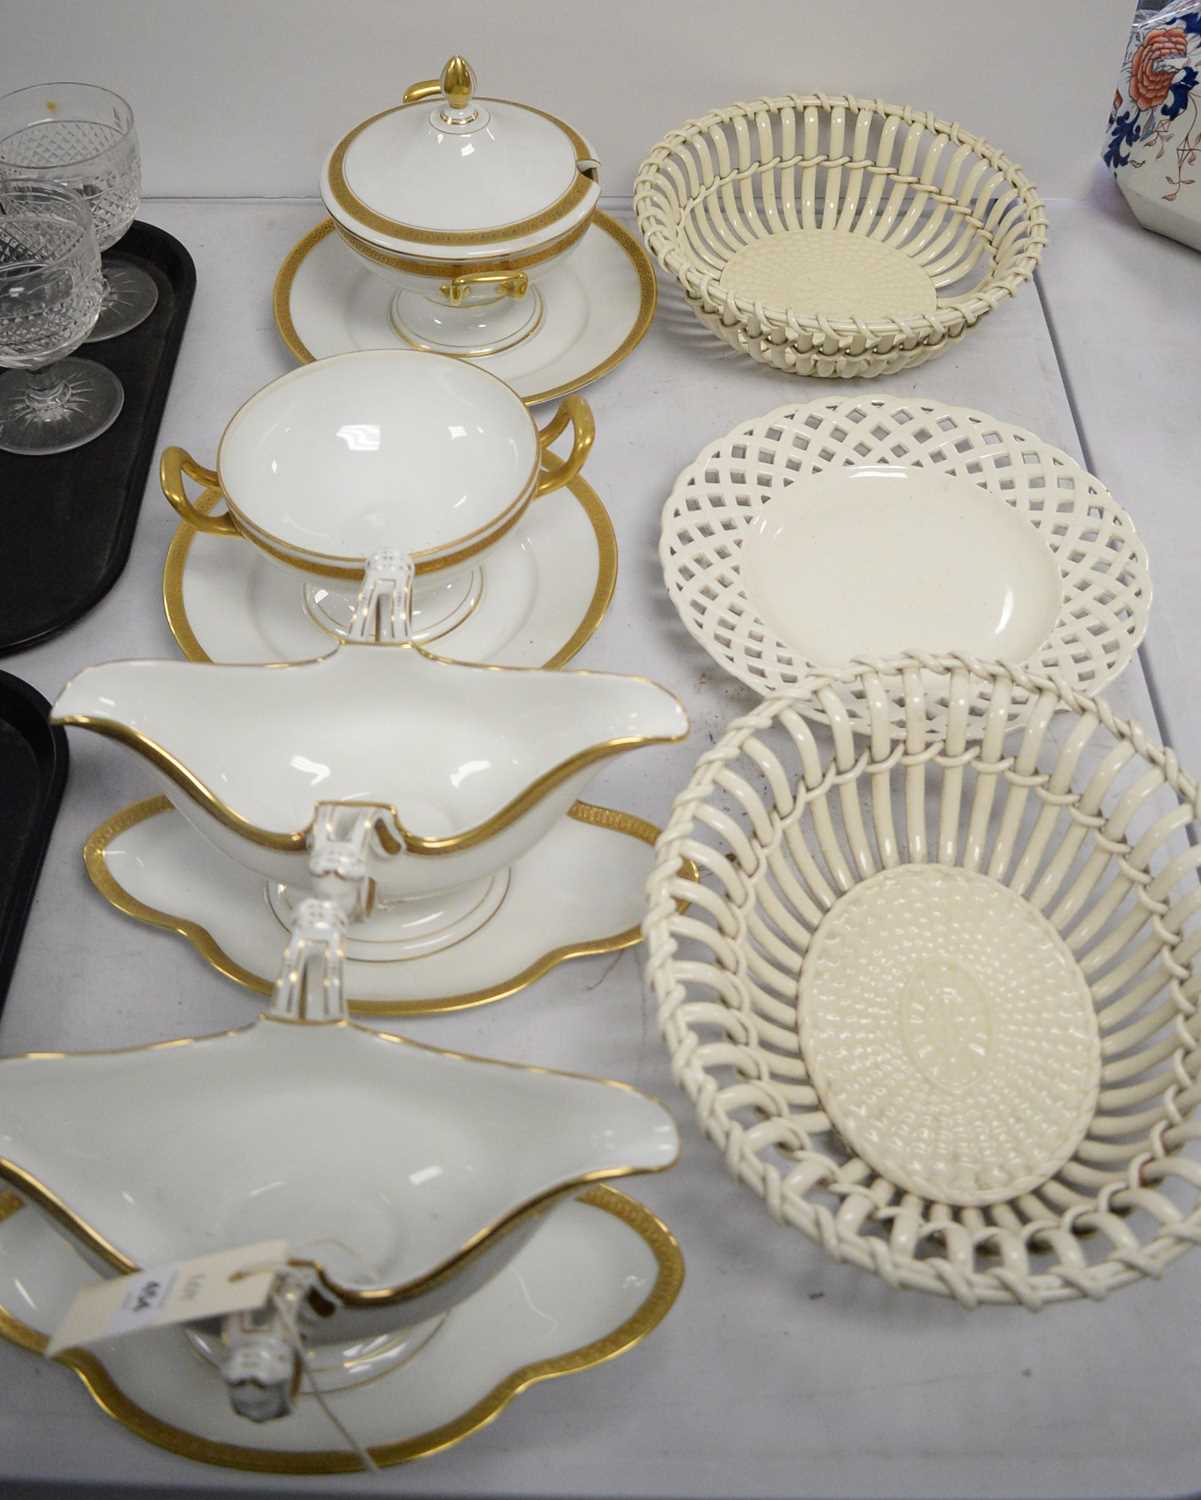 Pair of Rosenthal tureens and pair of sauce boats; and three Creamware dishes.